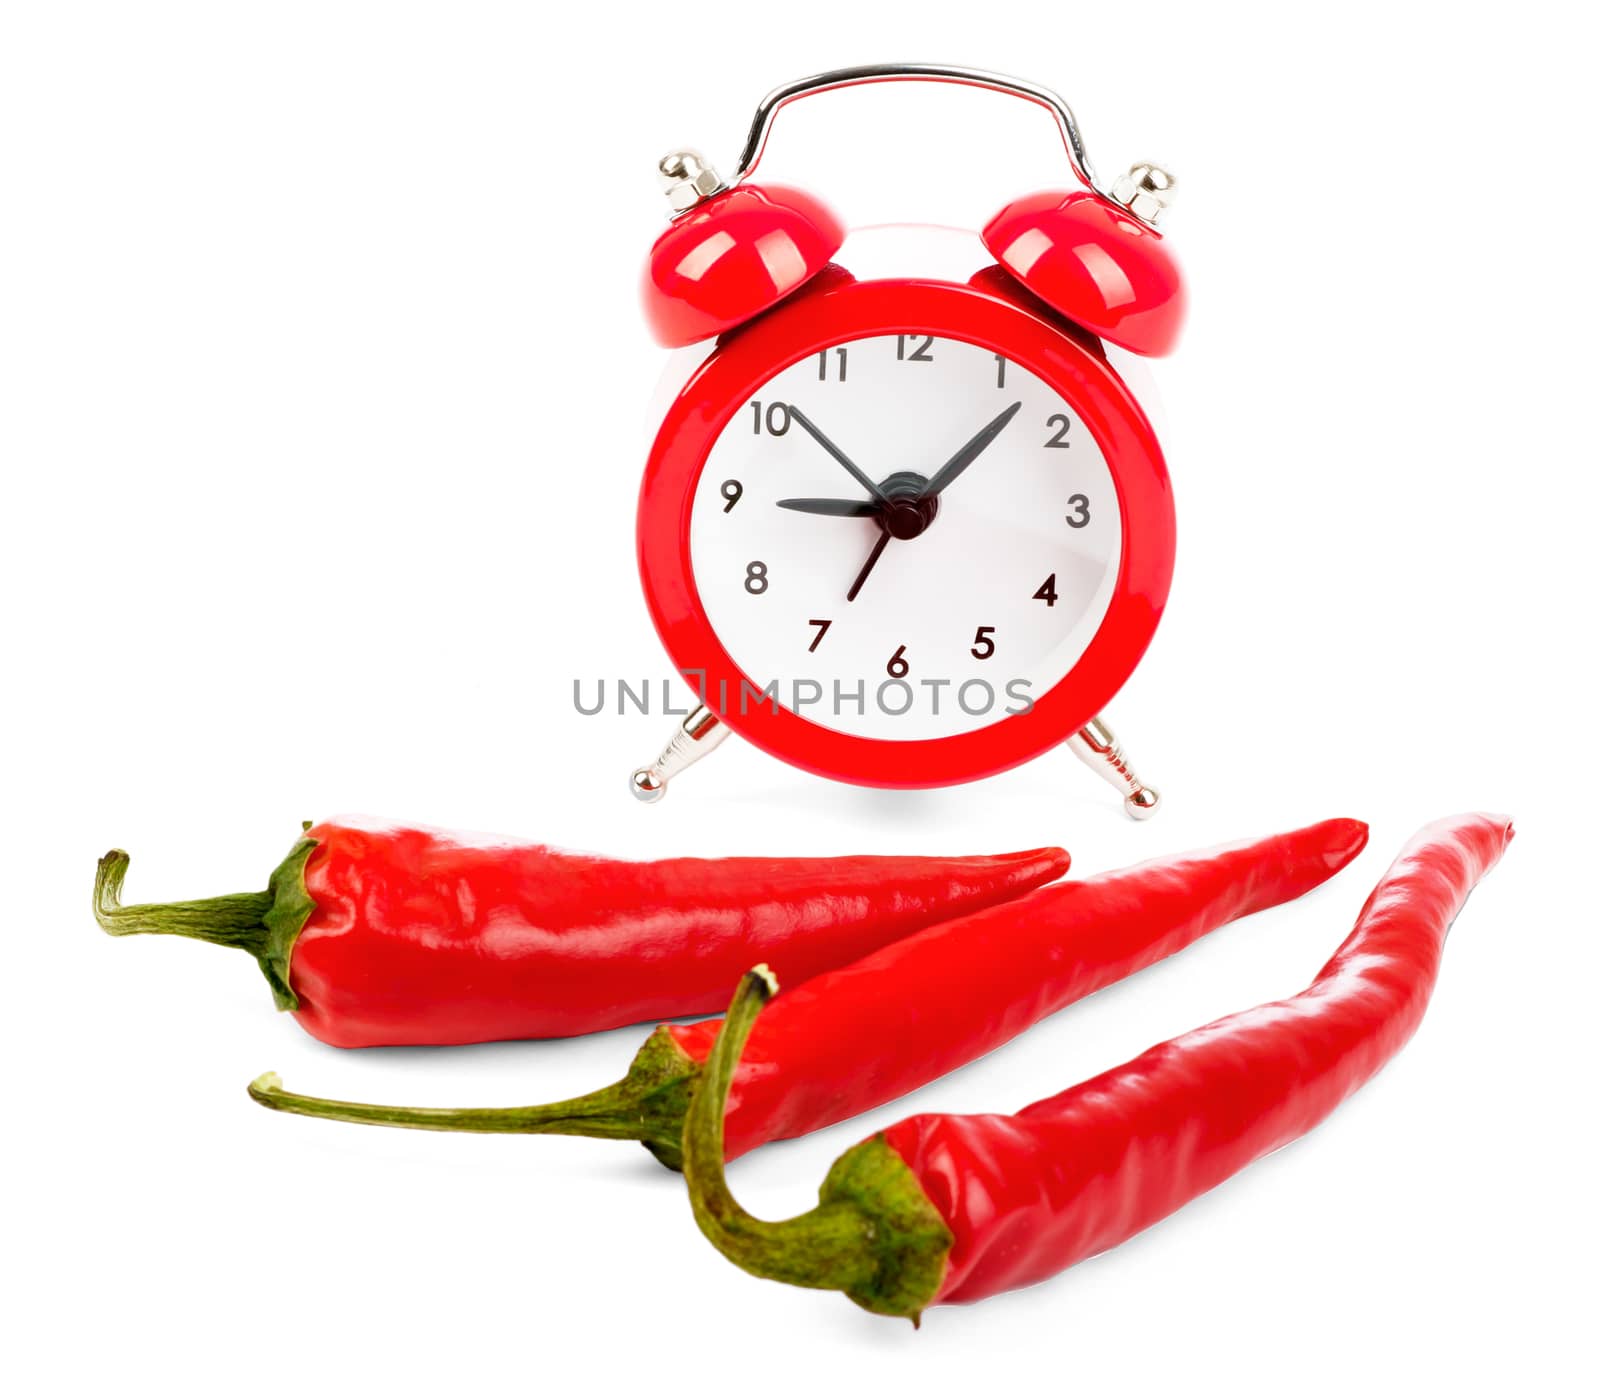 Red hot pepper with alarm clock on isolated white background, closeup